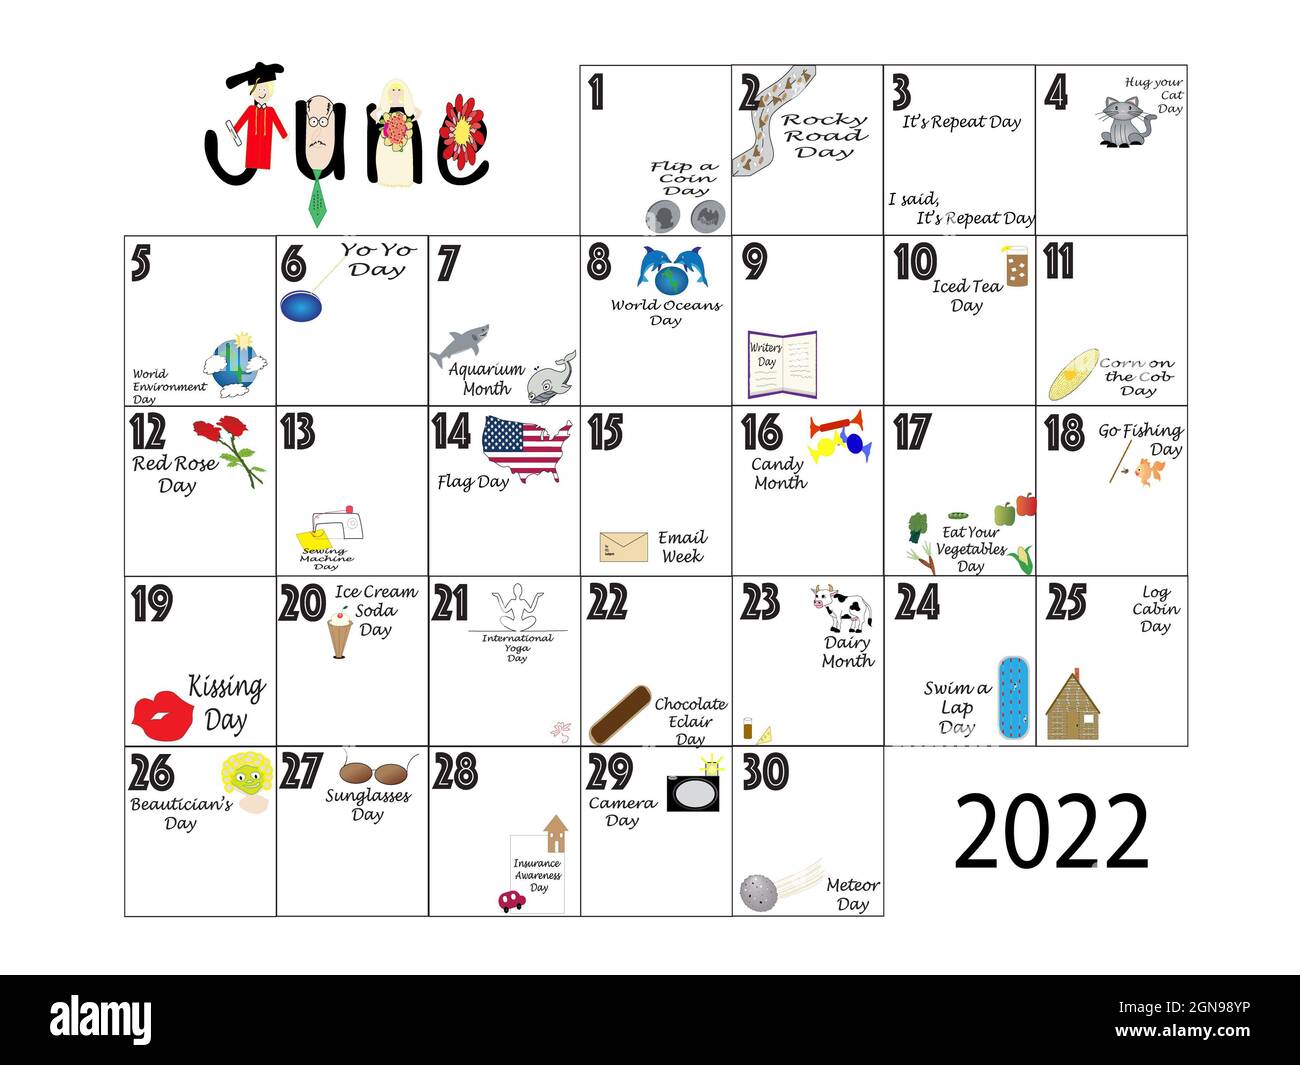 June 2022 Calendar With Holidays June 2022 Illustrated Monthly Calendar Of Quirky Holidays And Unusual  Celebrations In Colorful Graphics On White Stock Photo - Alamy